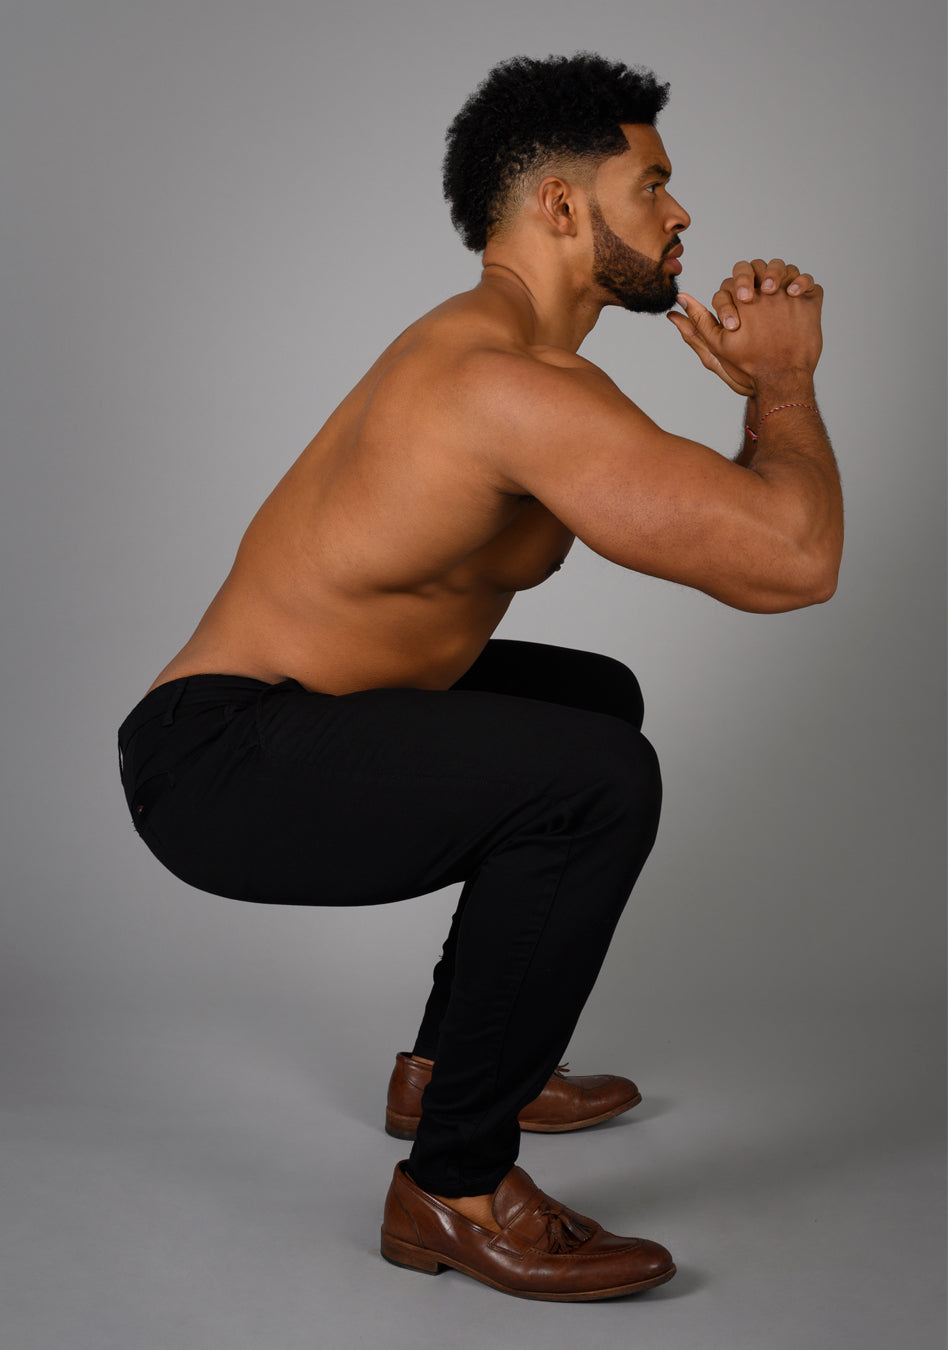 Squat proof Black Athletic fit chinos offering a perfect blend of comfort and style for well-built physiques, with a contoured waist and muscle fit design for an on-trend appearance.